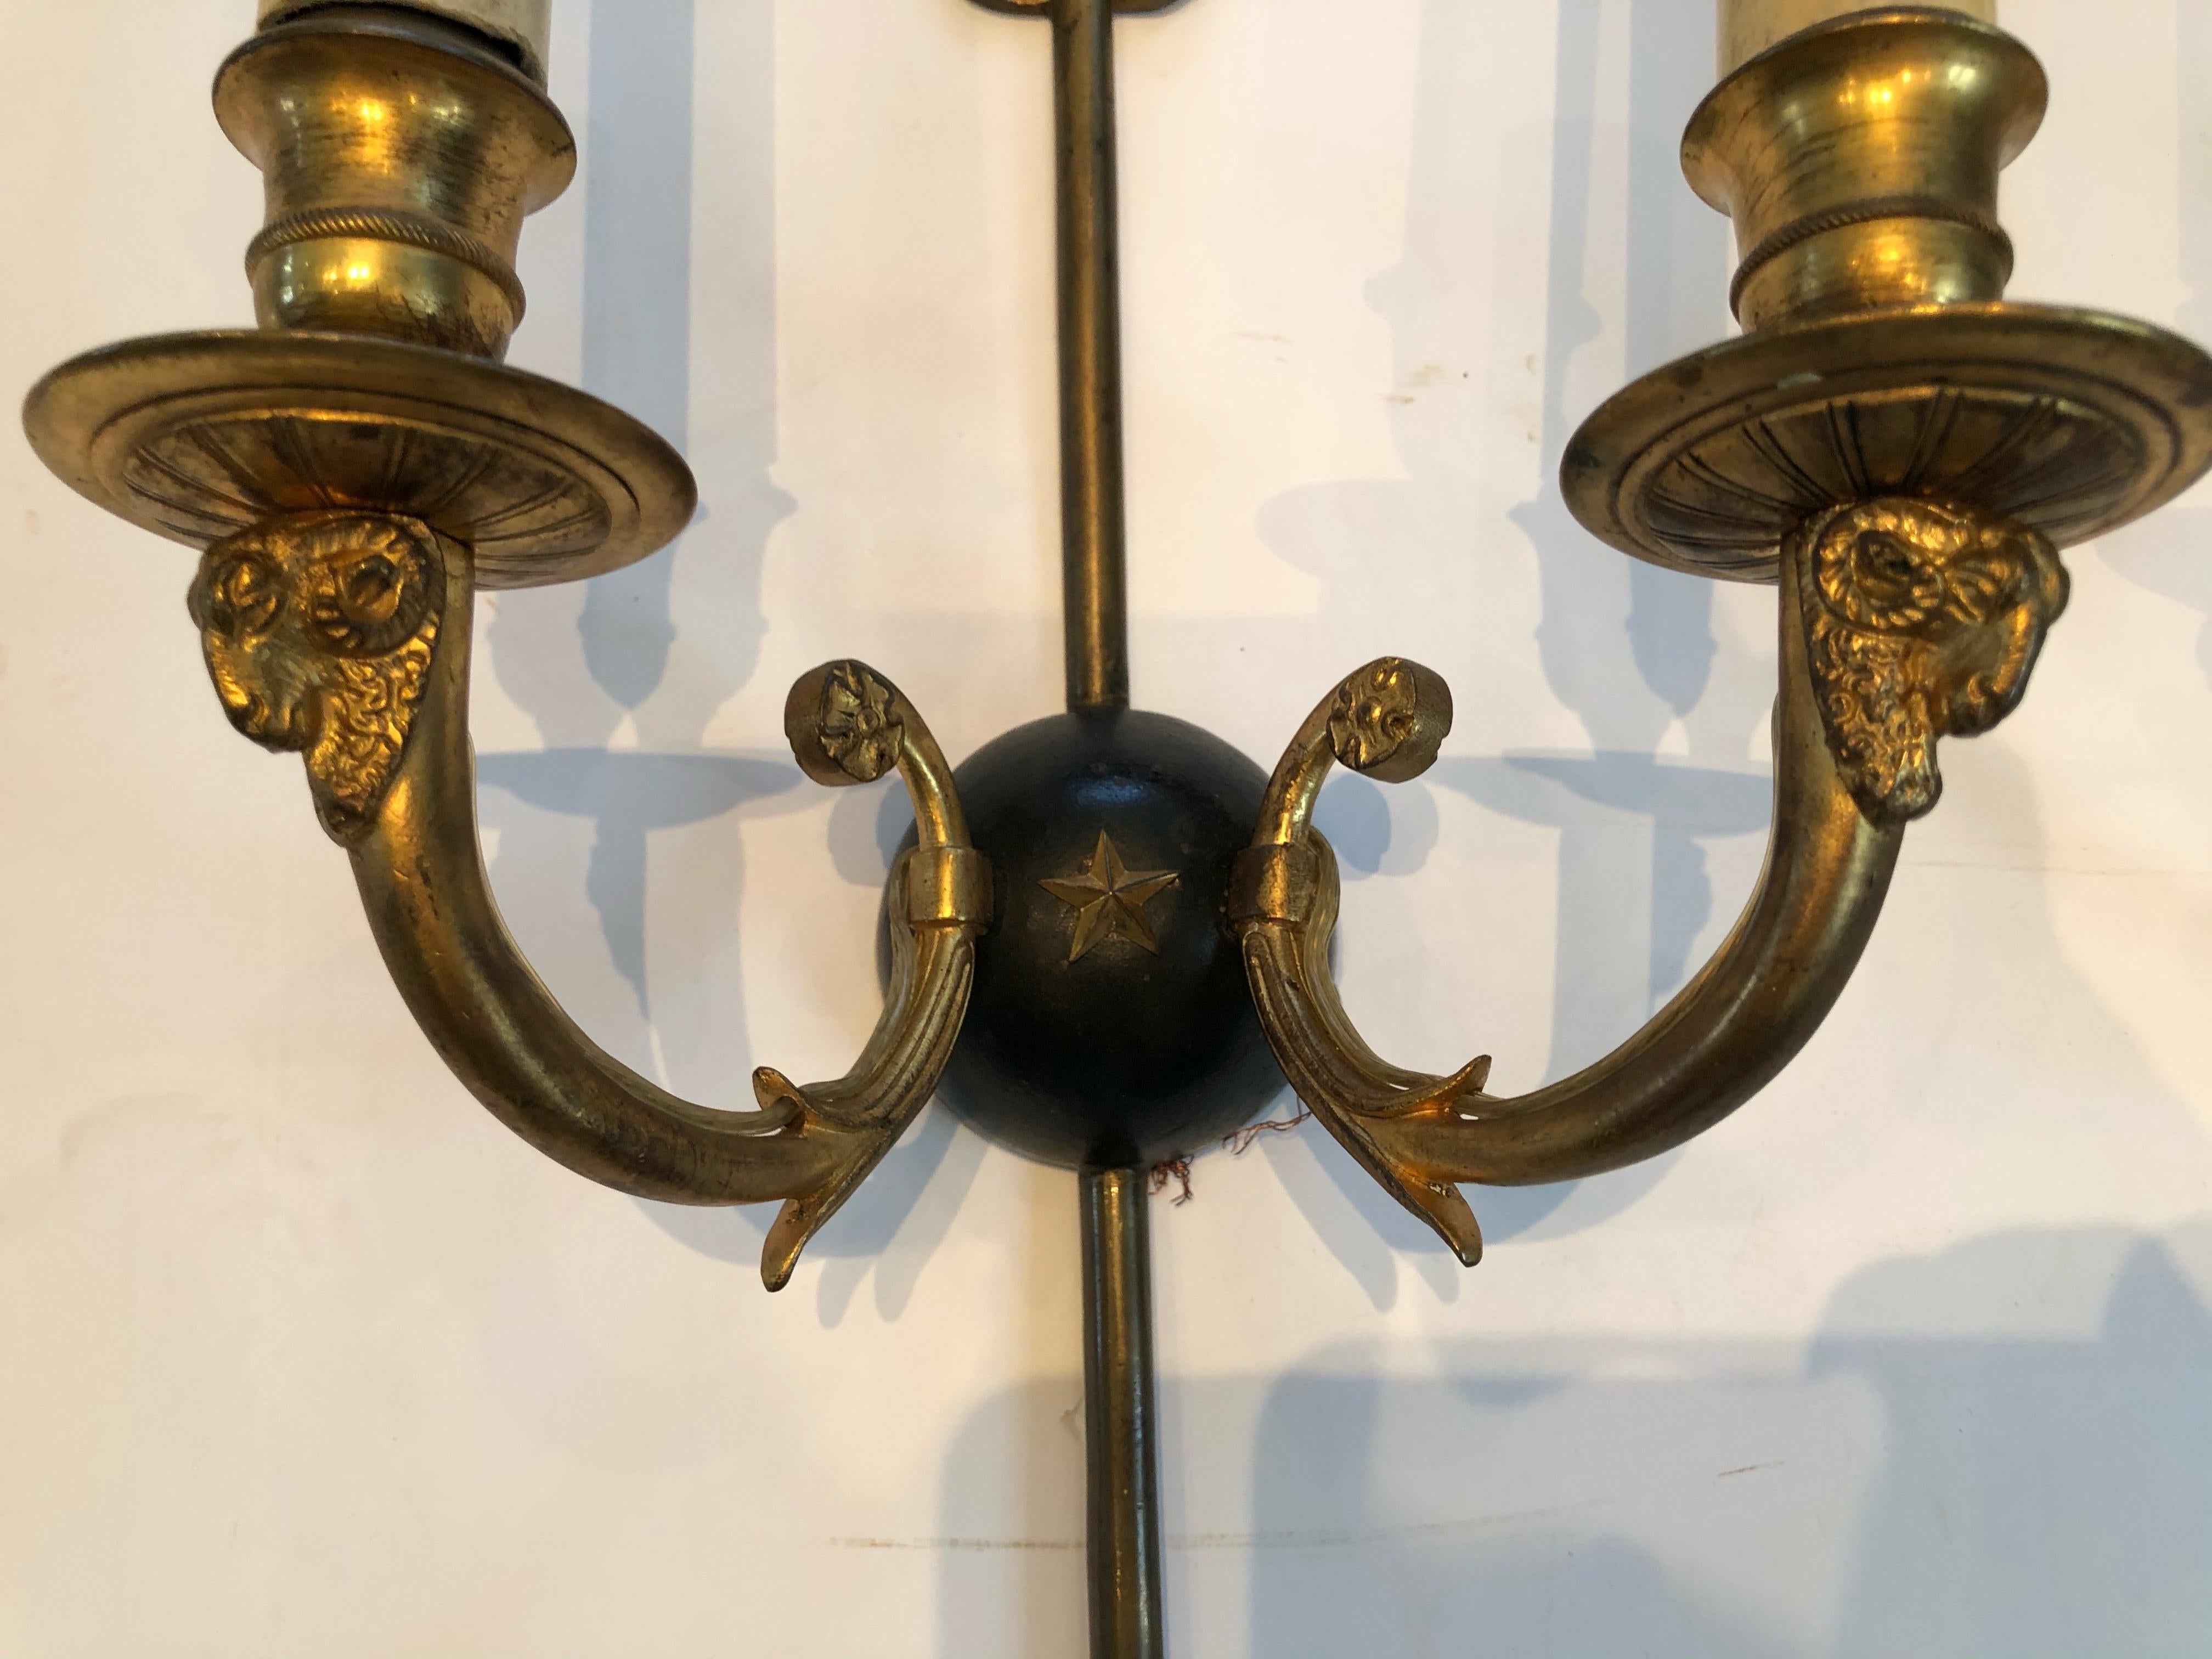 Pair of brass and ebonized Regency style wall sconces having an arrow motif and rams heads at the base of each light; the center sphere is black with a brass star.